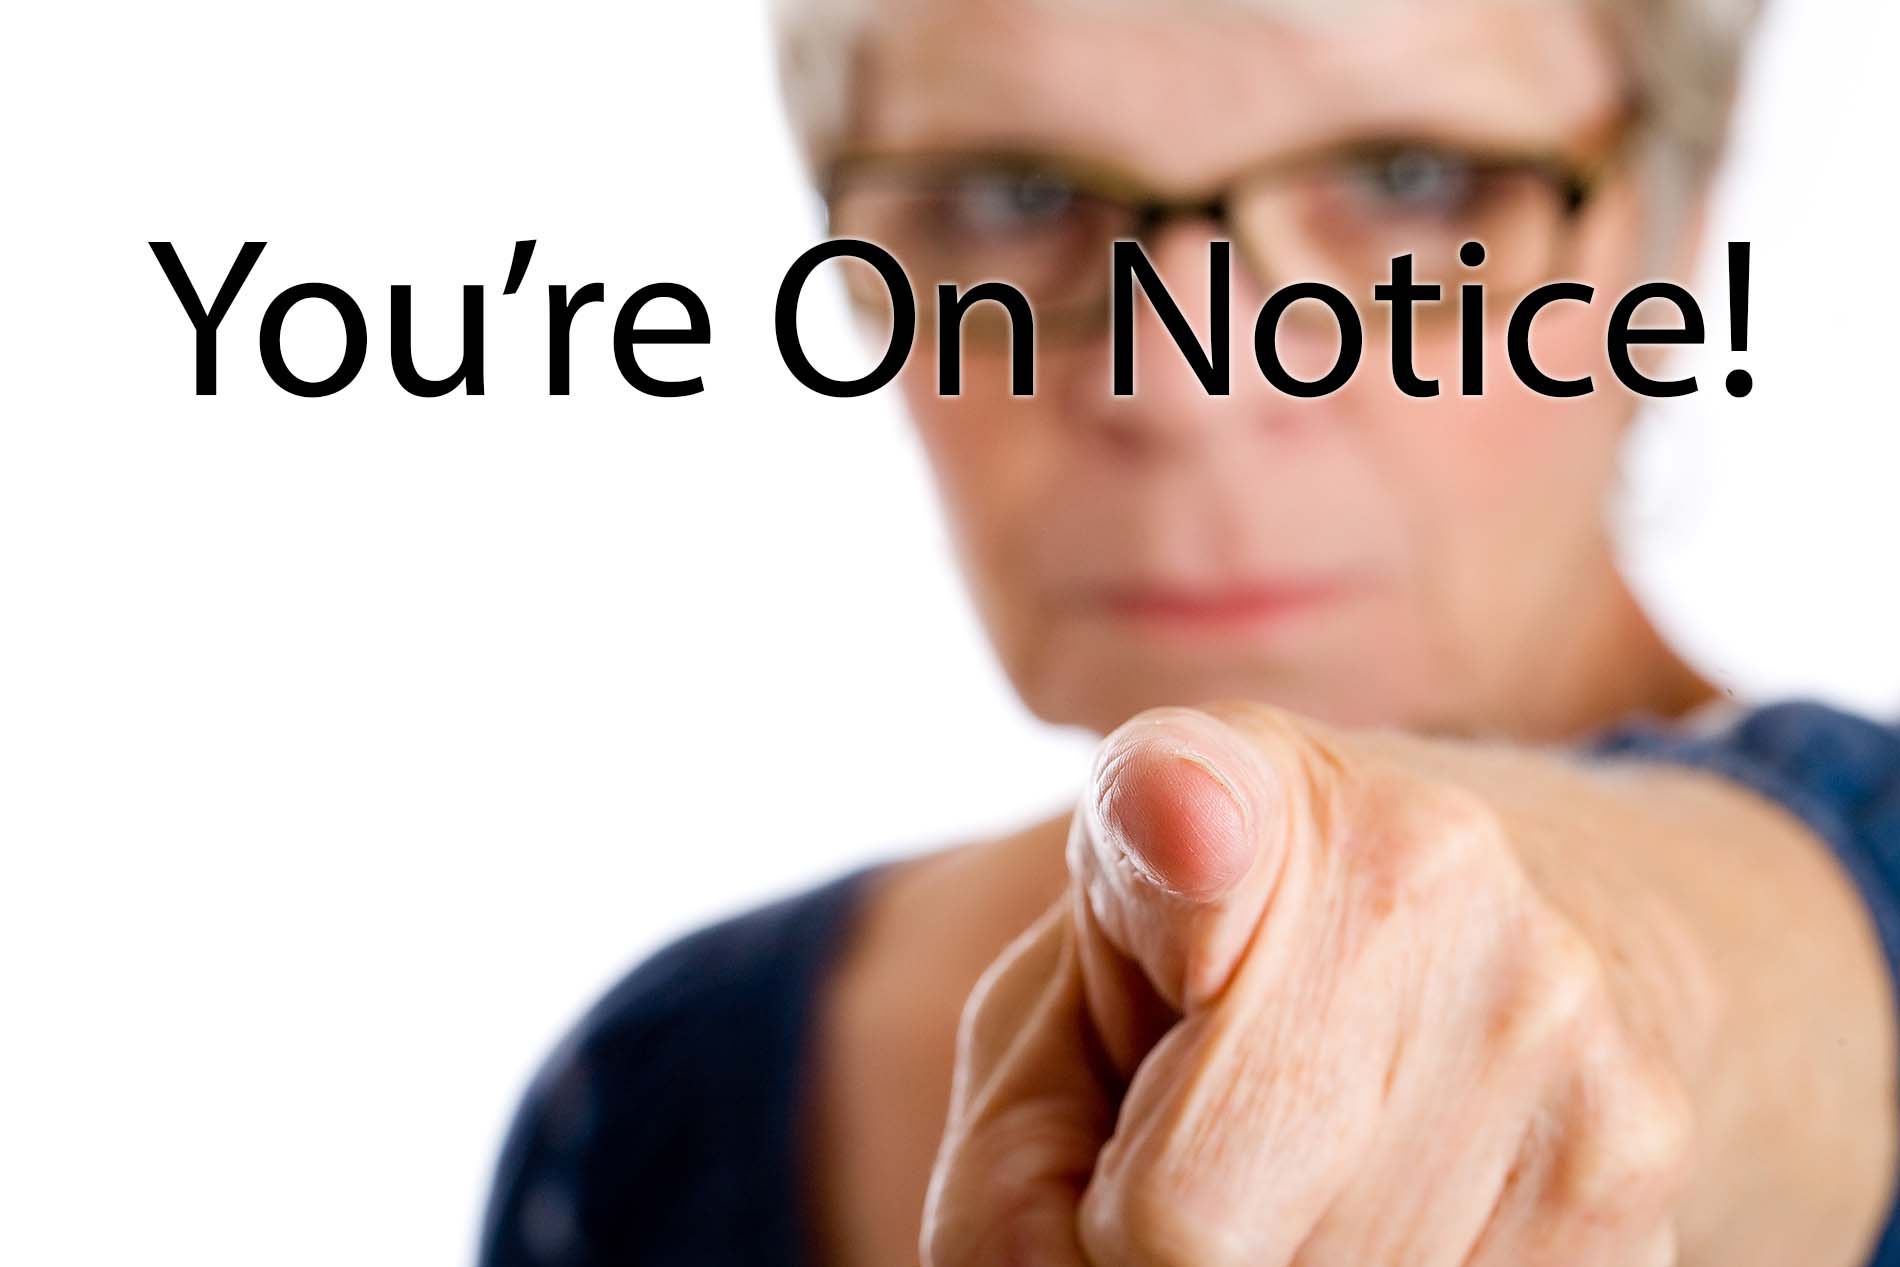 Female judge point index finger right at camera with the words "You're On Notice".